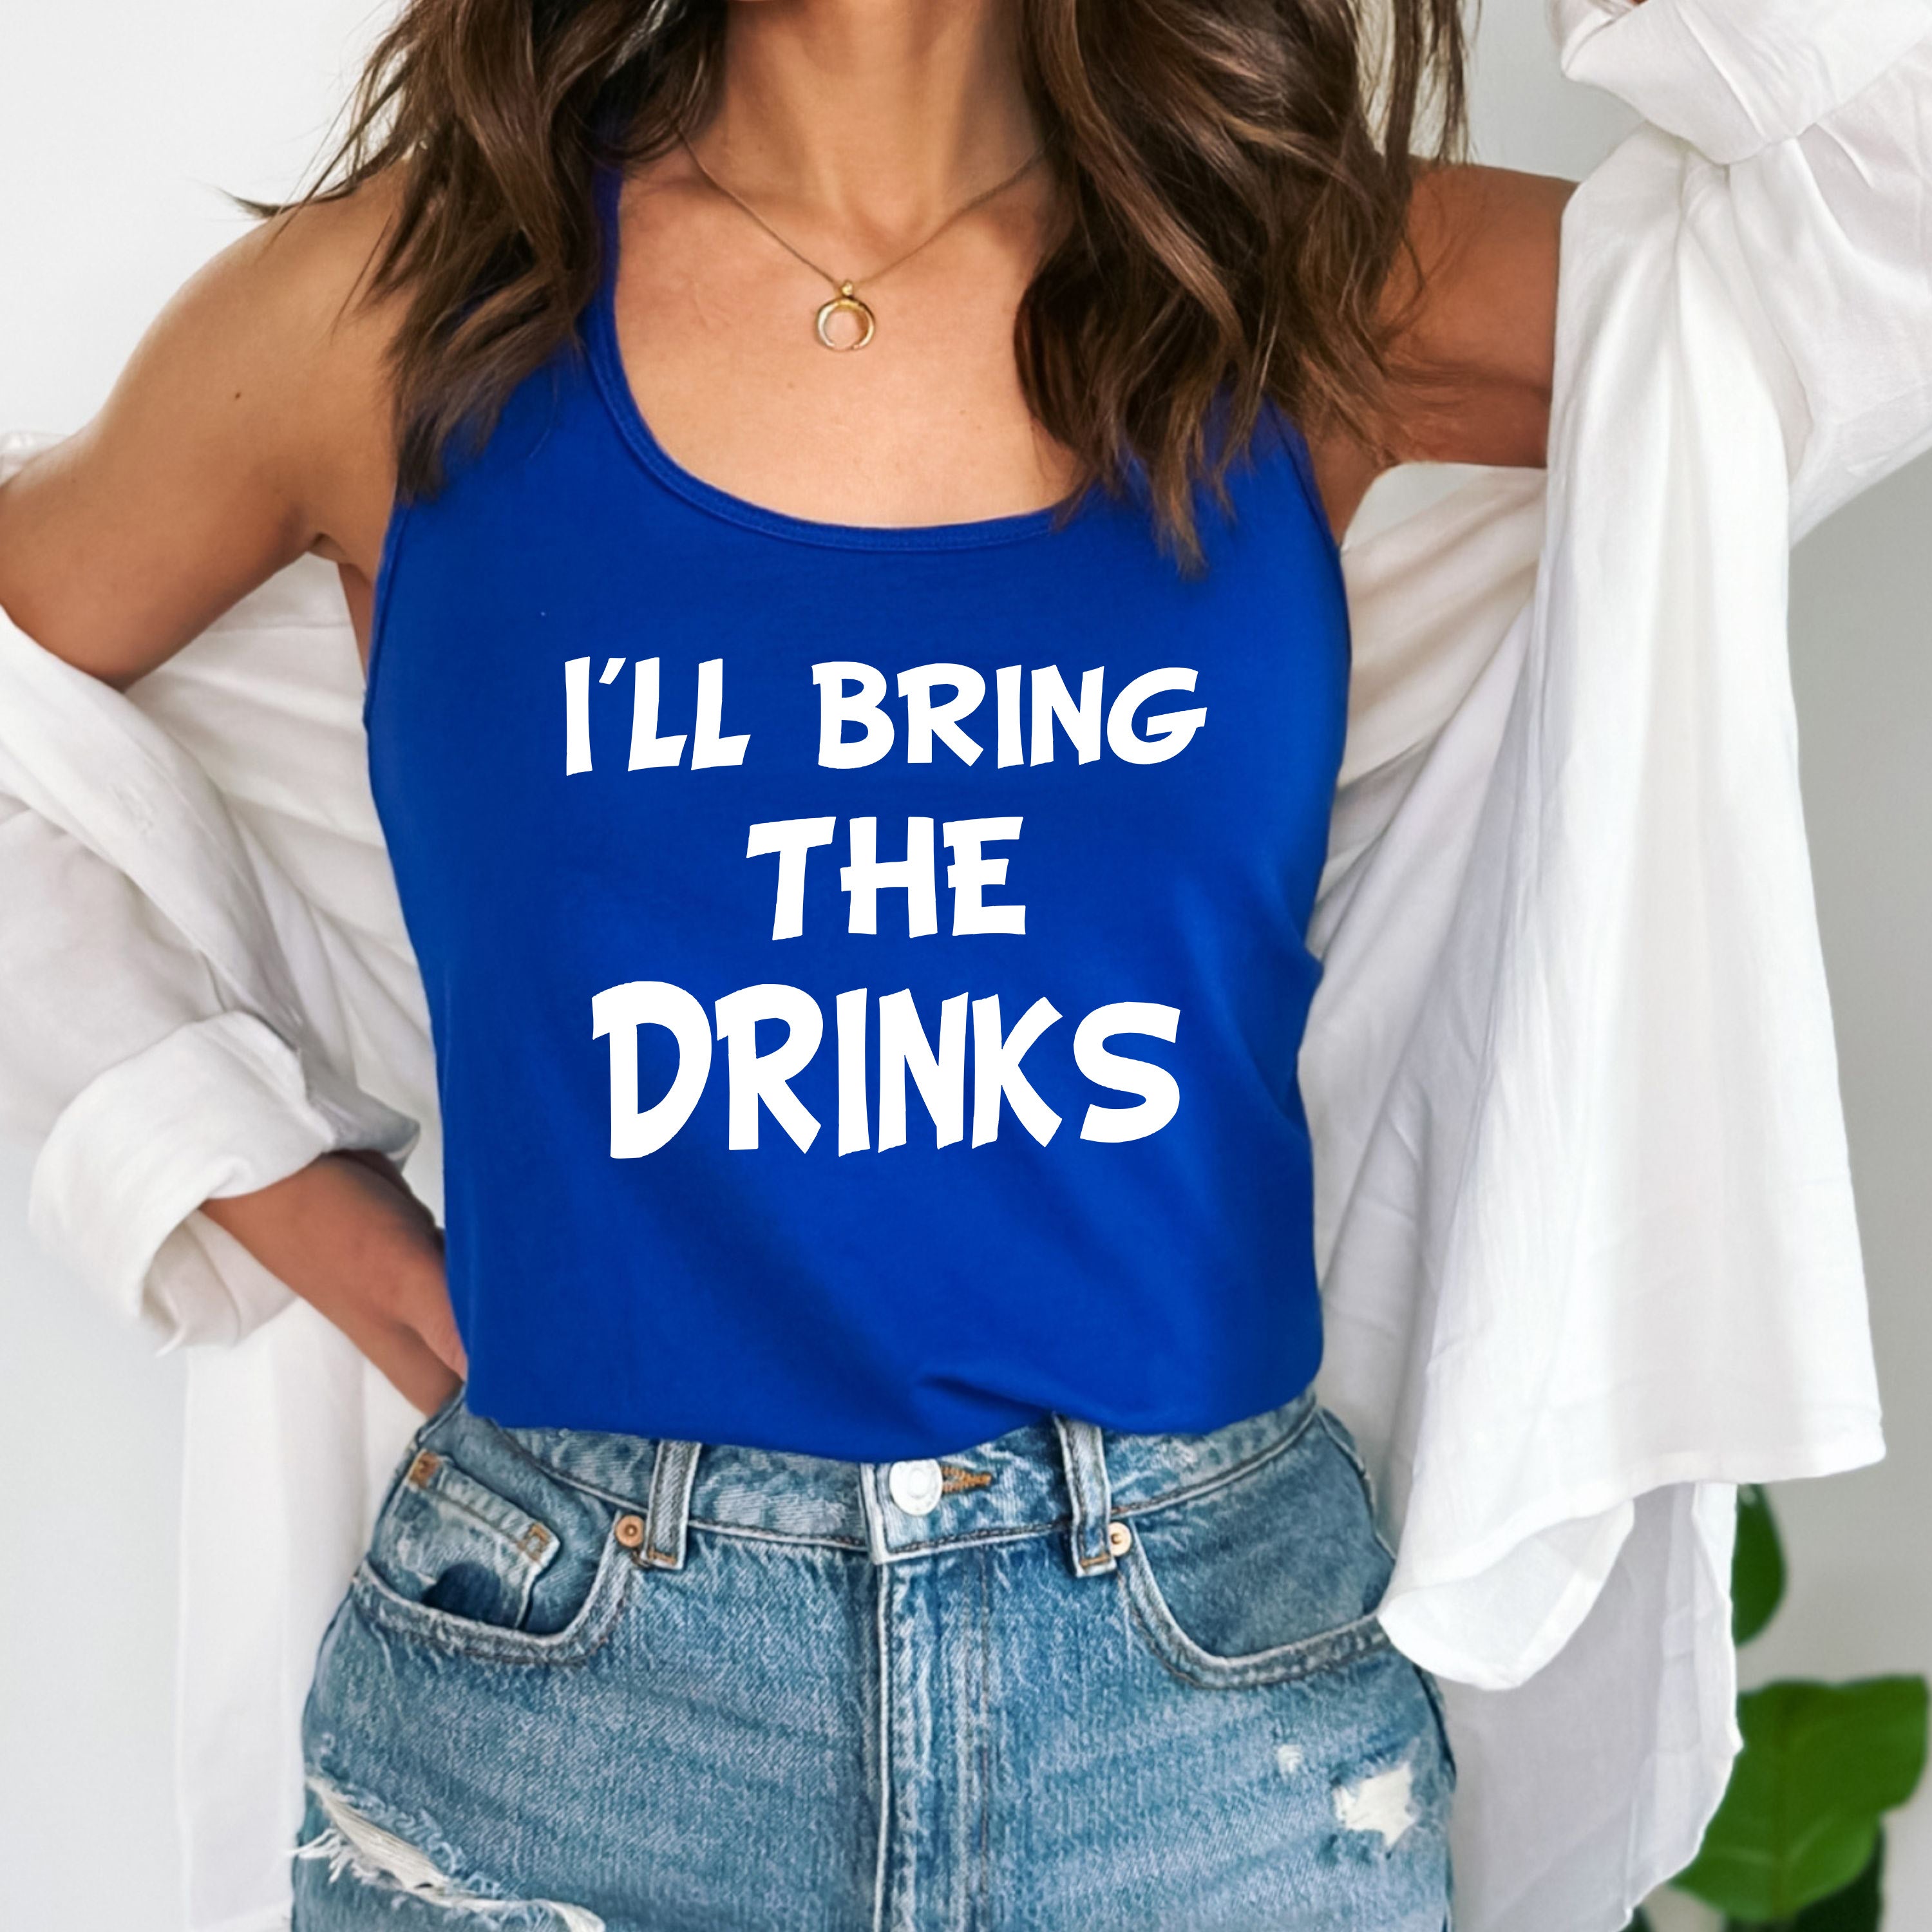 "I'LL BRING THE DRINKS", Tank Top